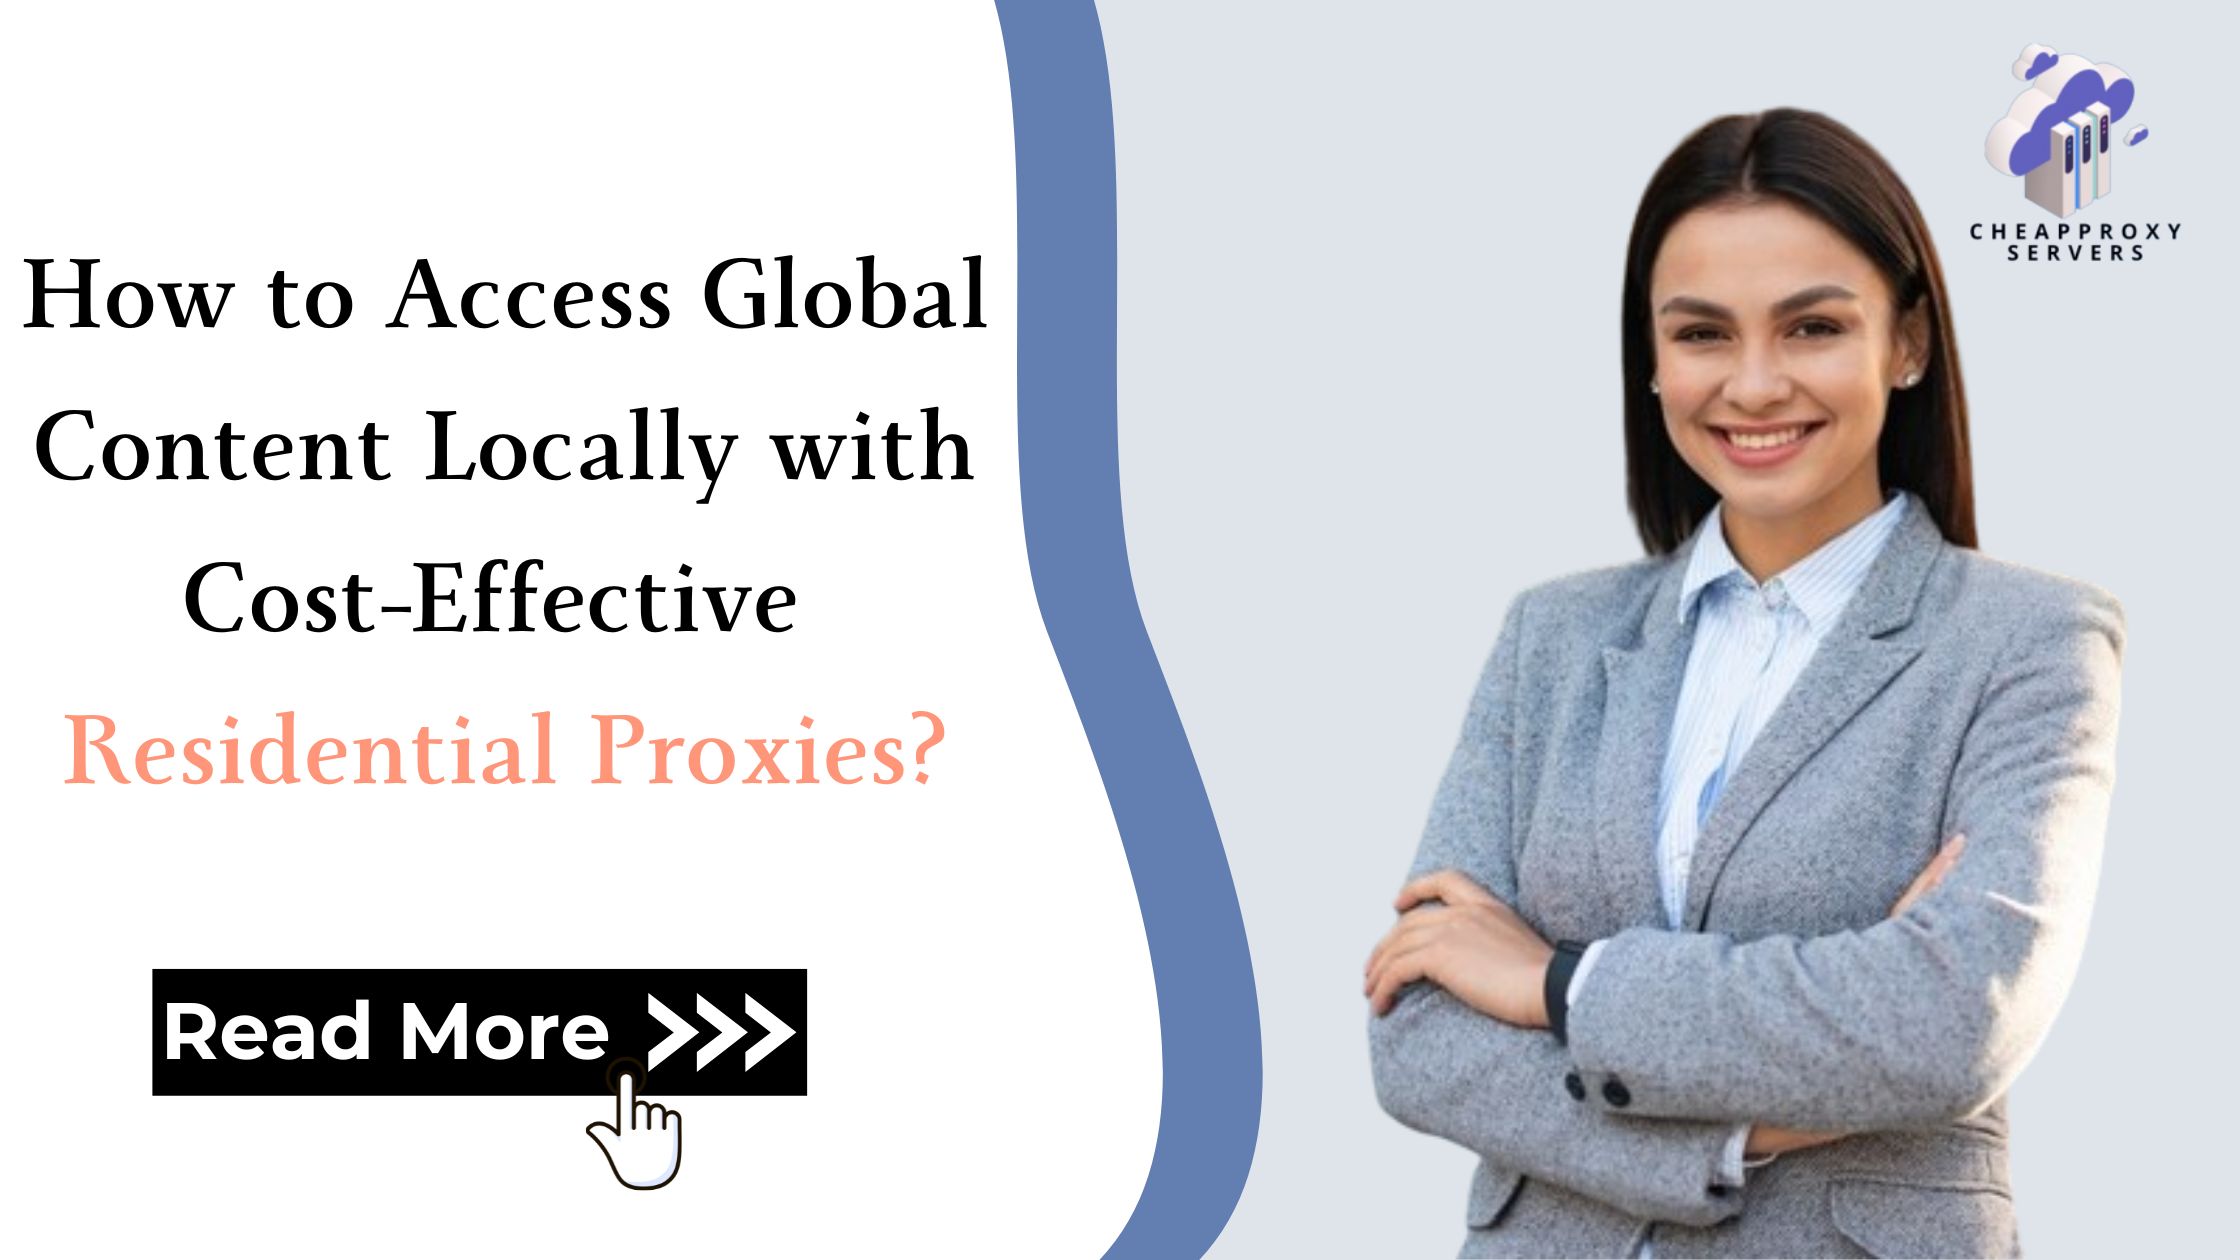 Residential proxies are intermediaries that use an IP address provided by an Internet Service Provider.